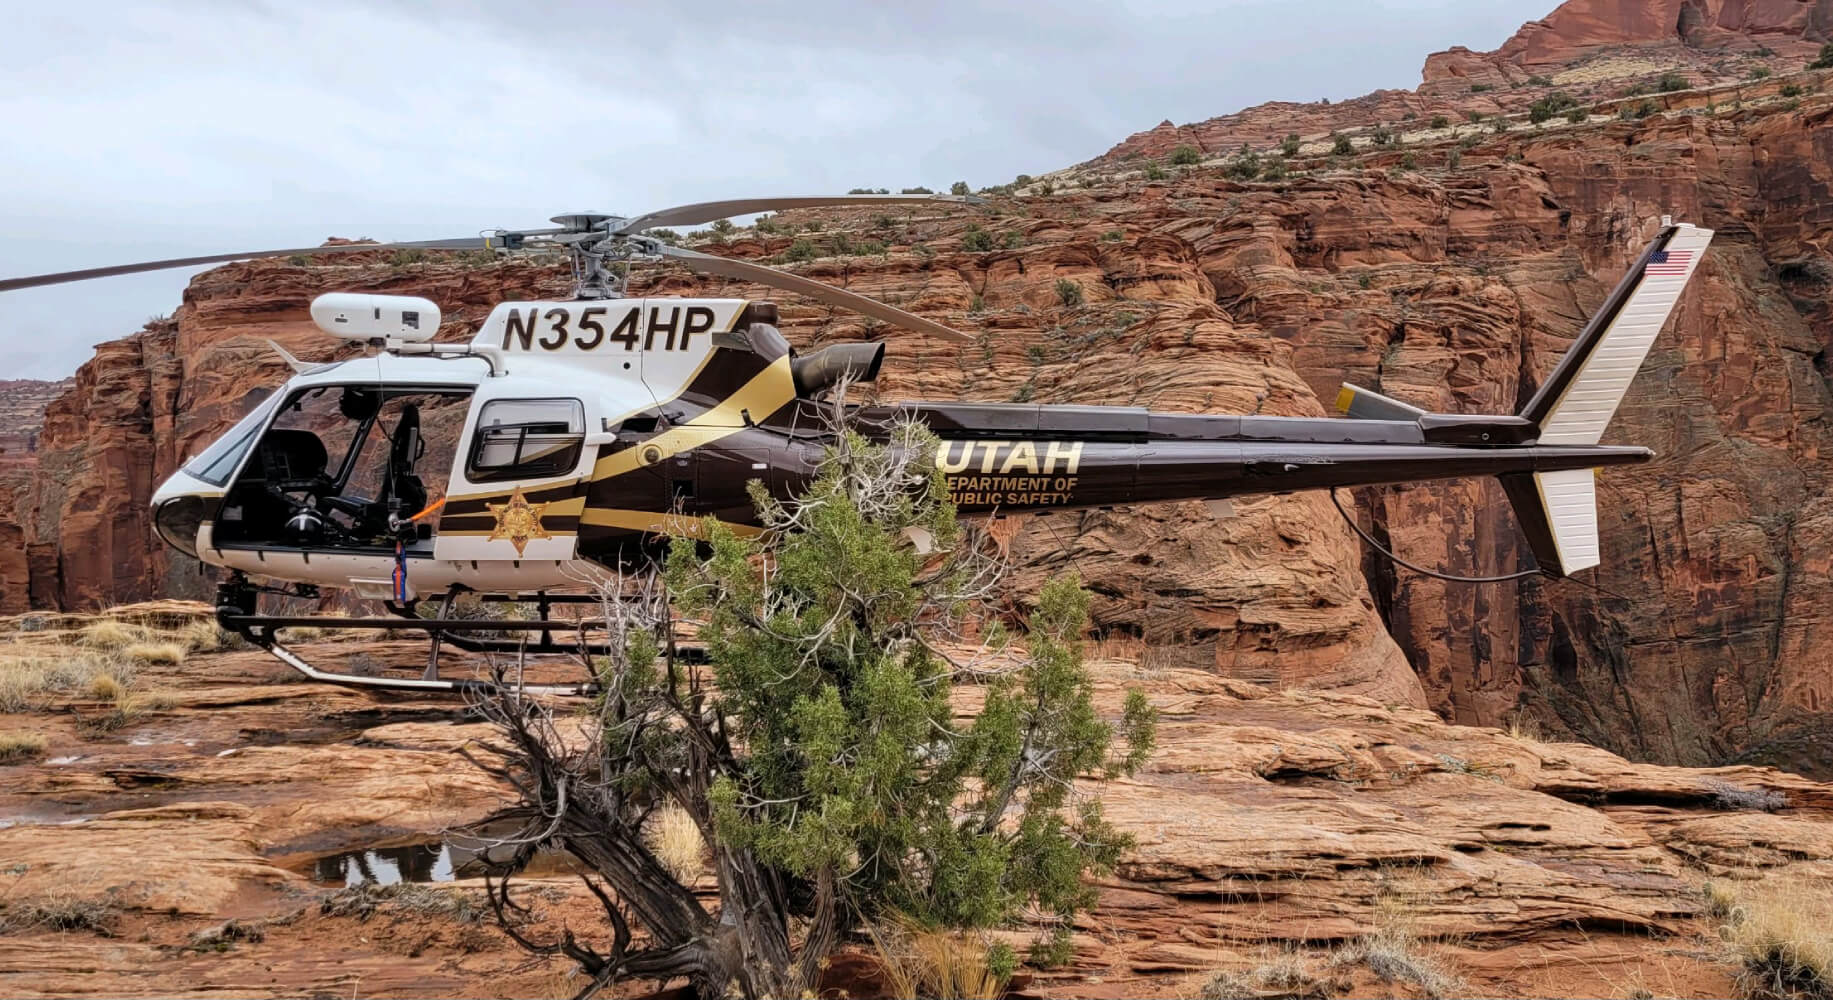 Utah DPS helicopters hoist 18 people from flash flood in Buckskin Gulch canyon